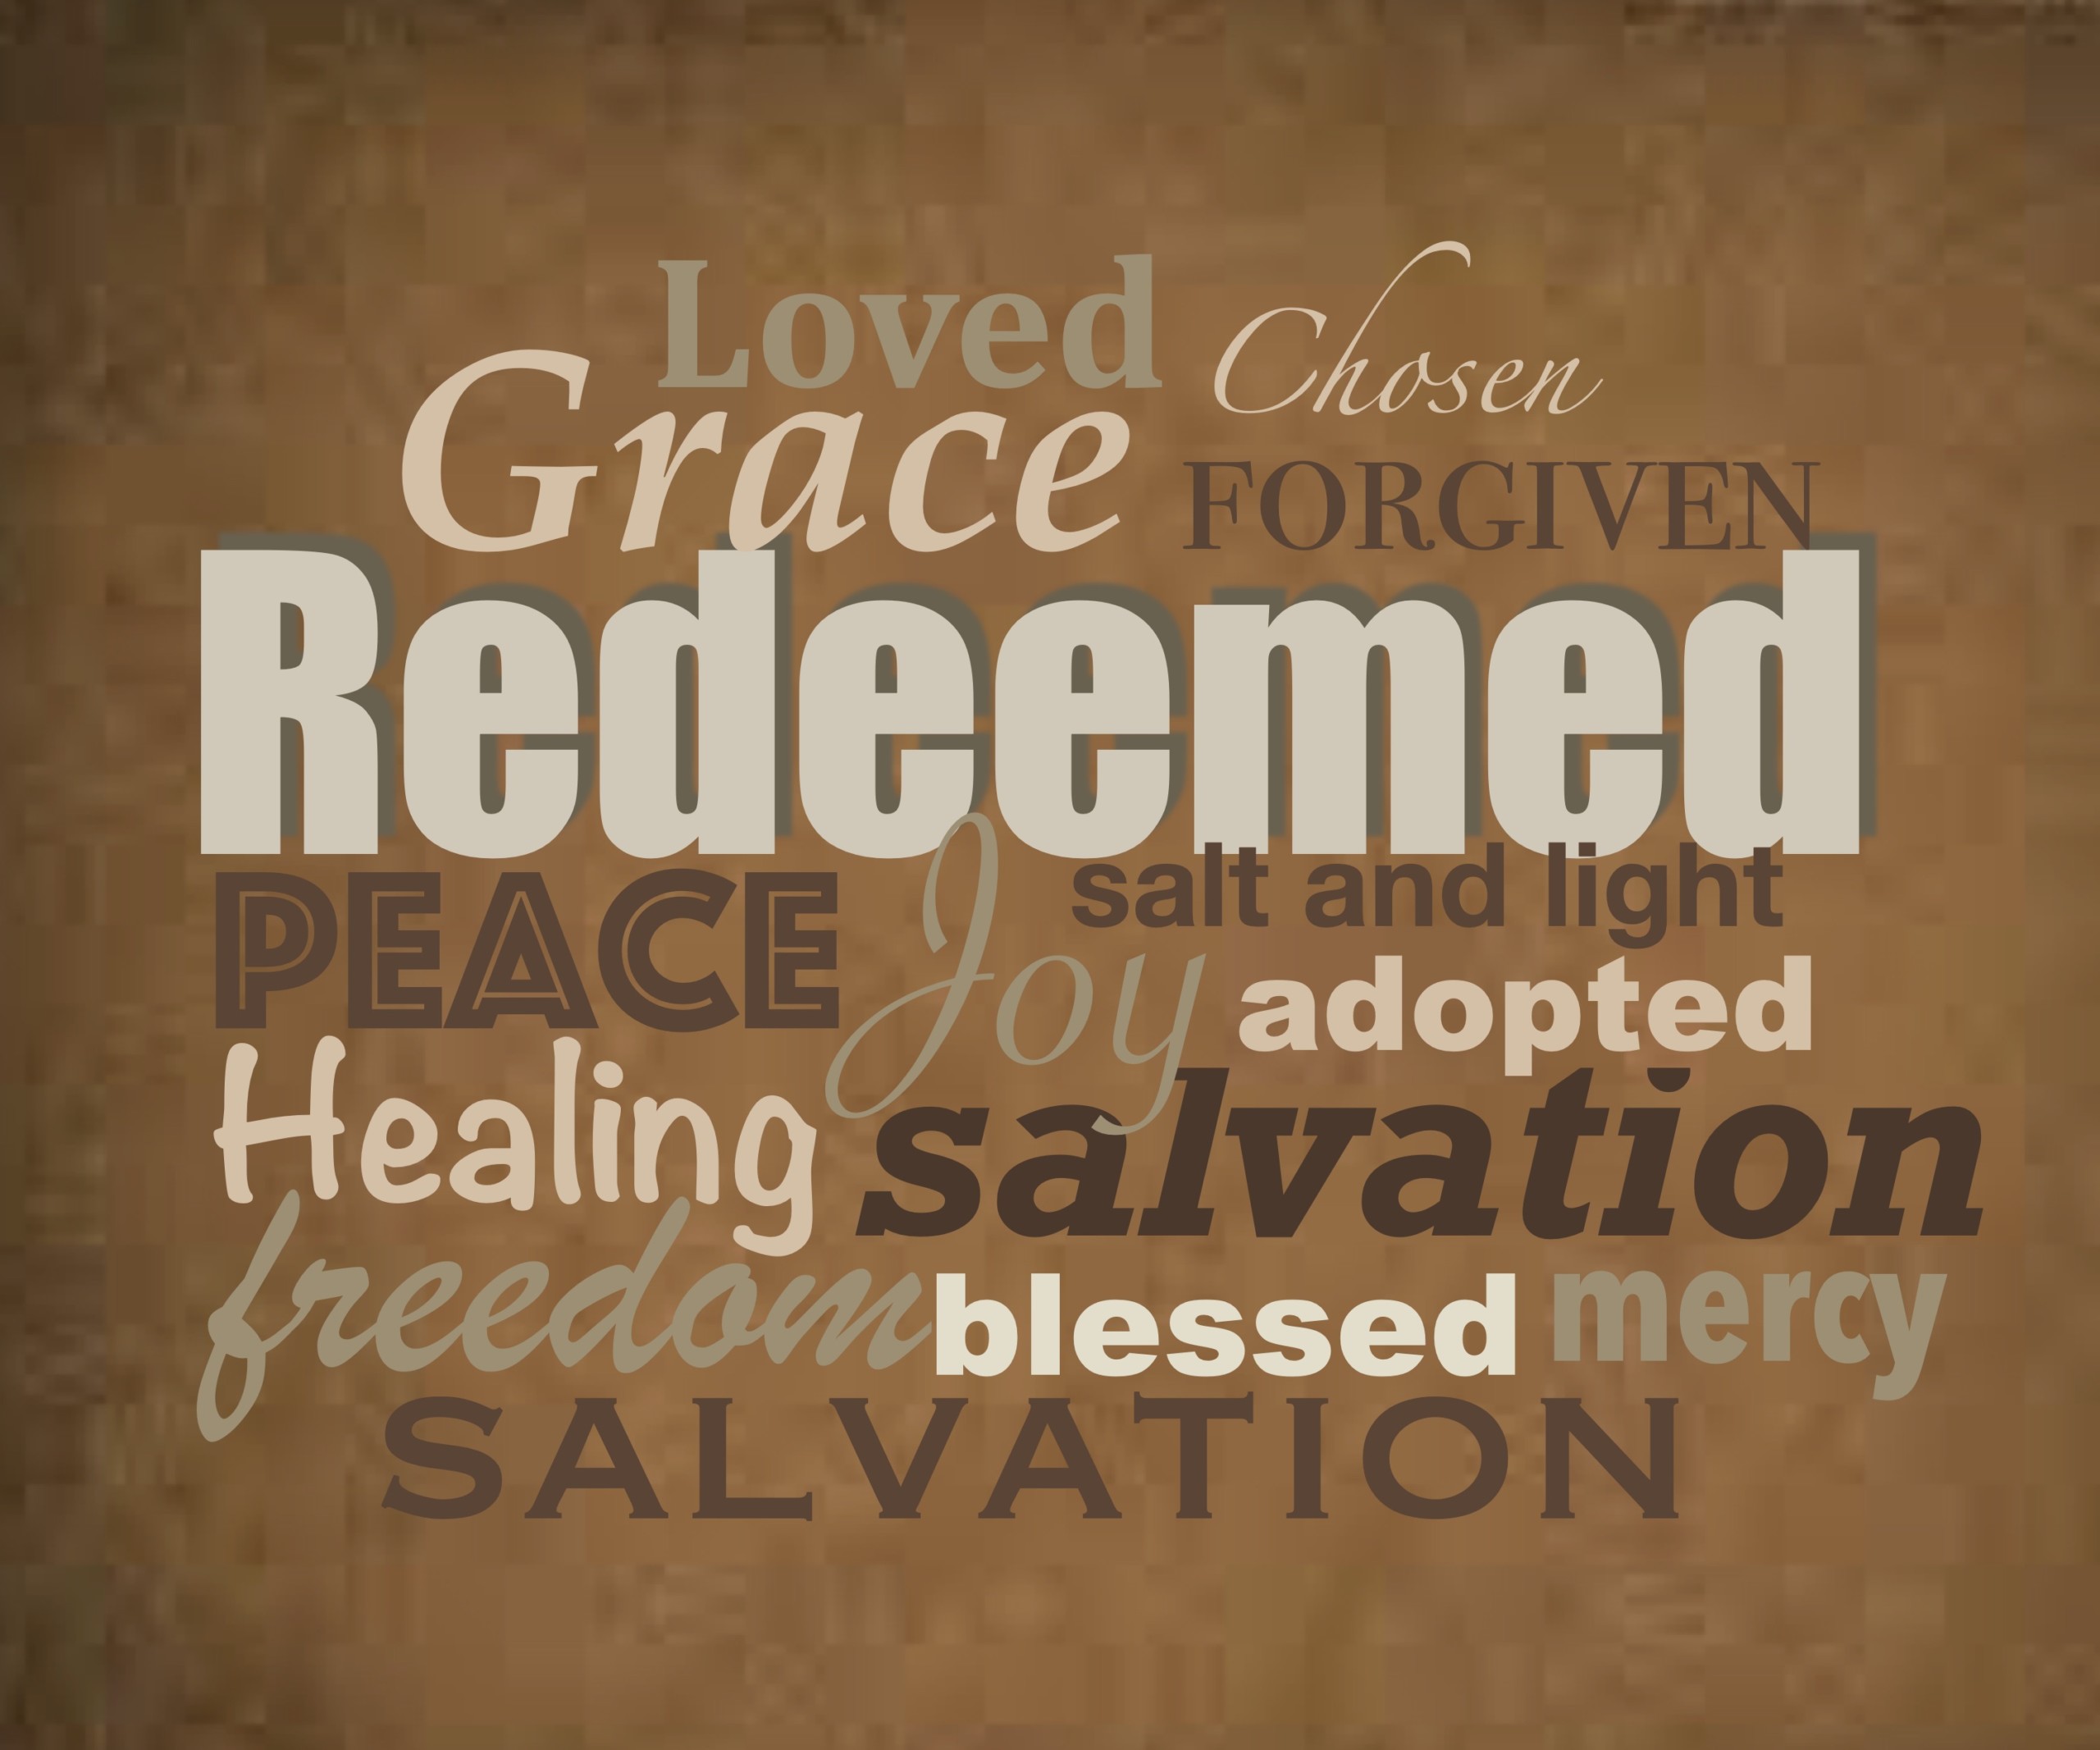 We, the redeemed